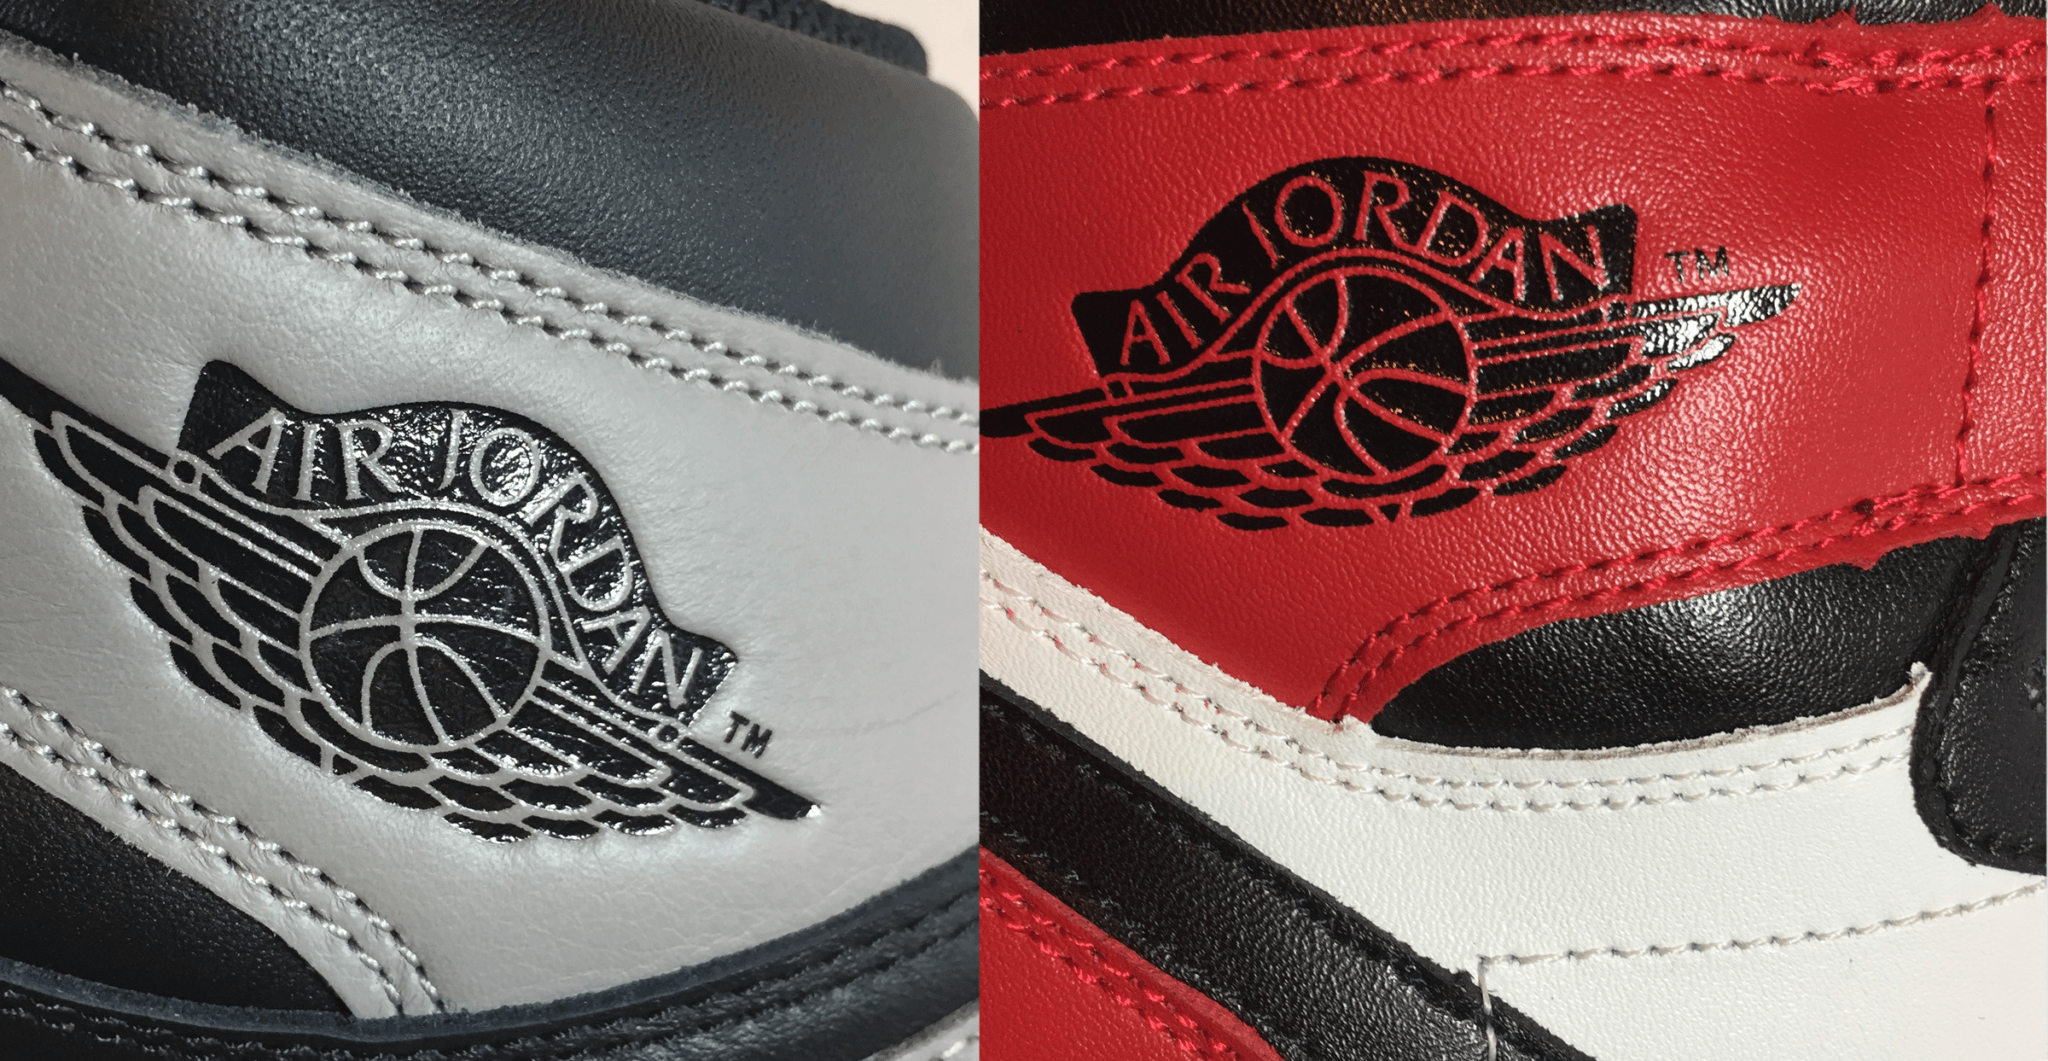 Sneaker with Wings Logo - Jordan-Wings-Logo-Nike-Fake - How Shoes are Made : The Sneaker ...